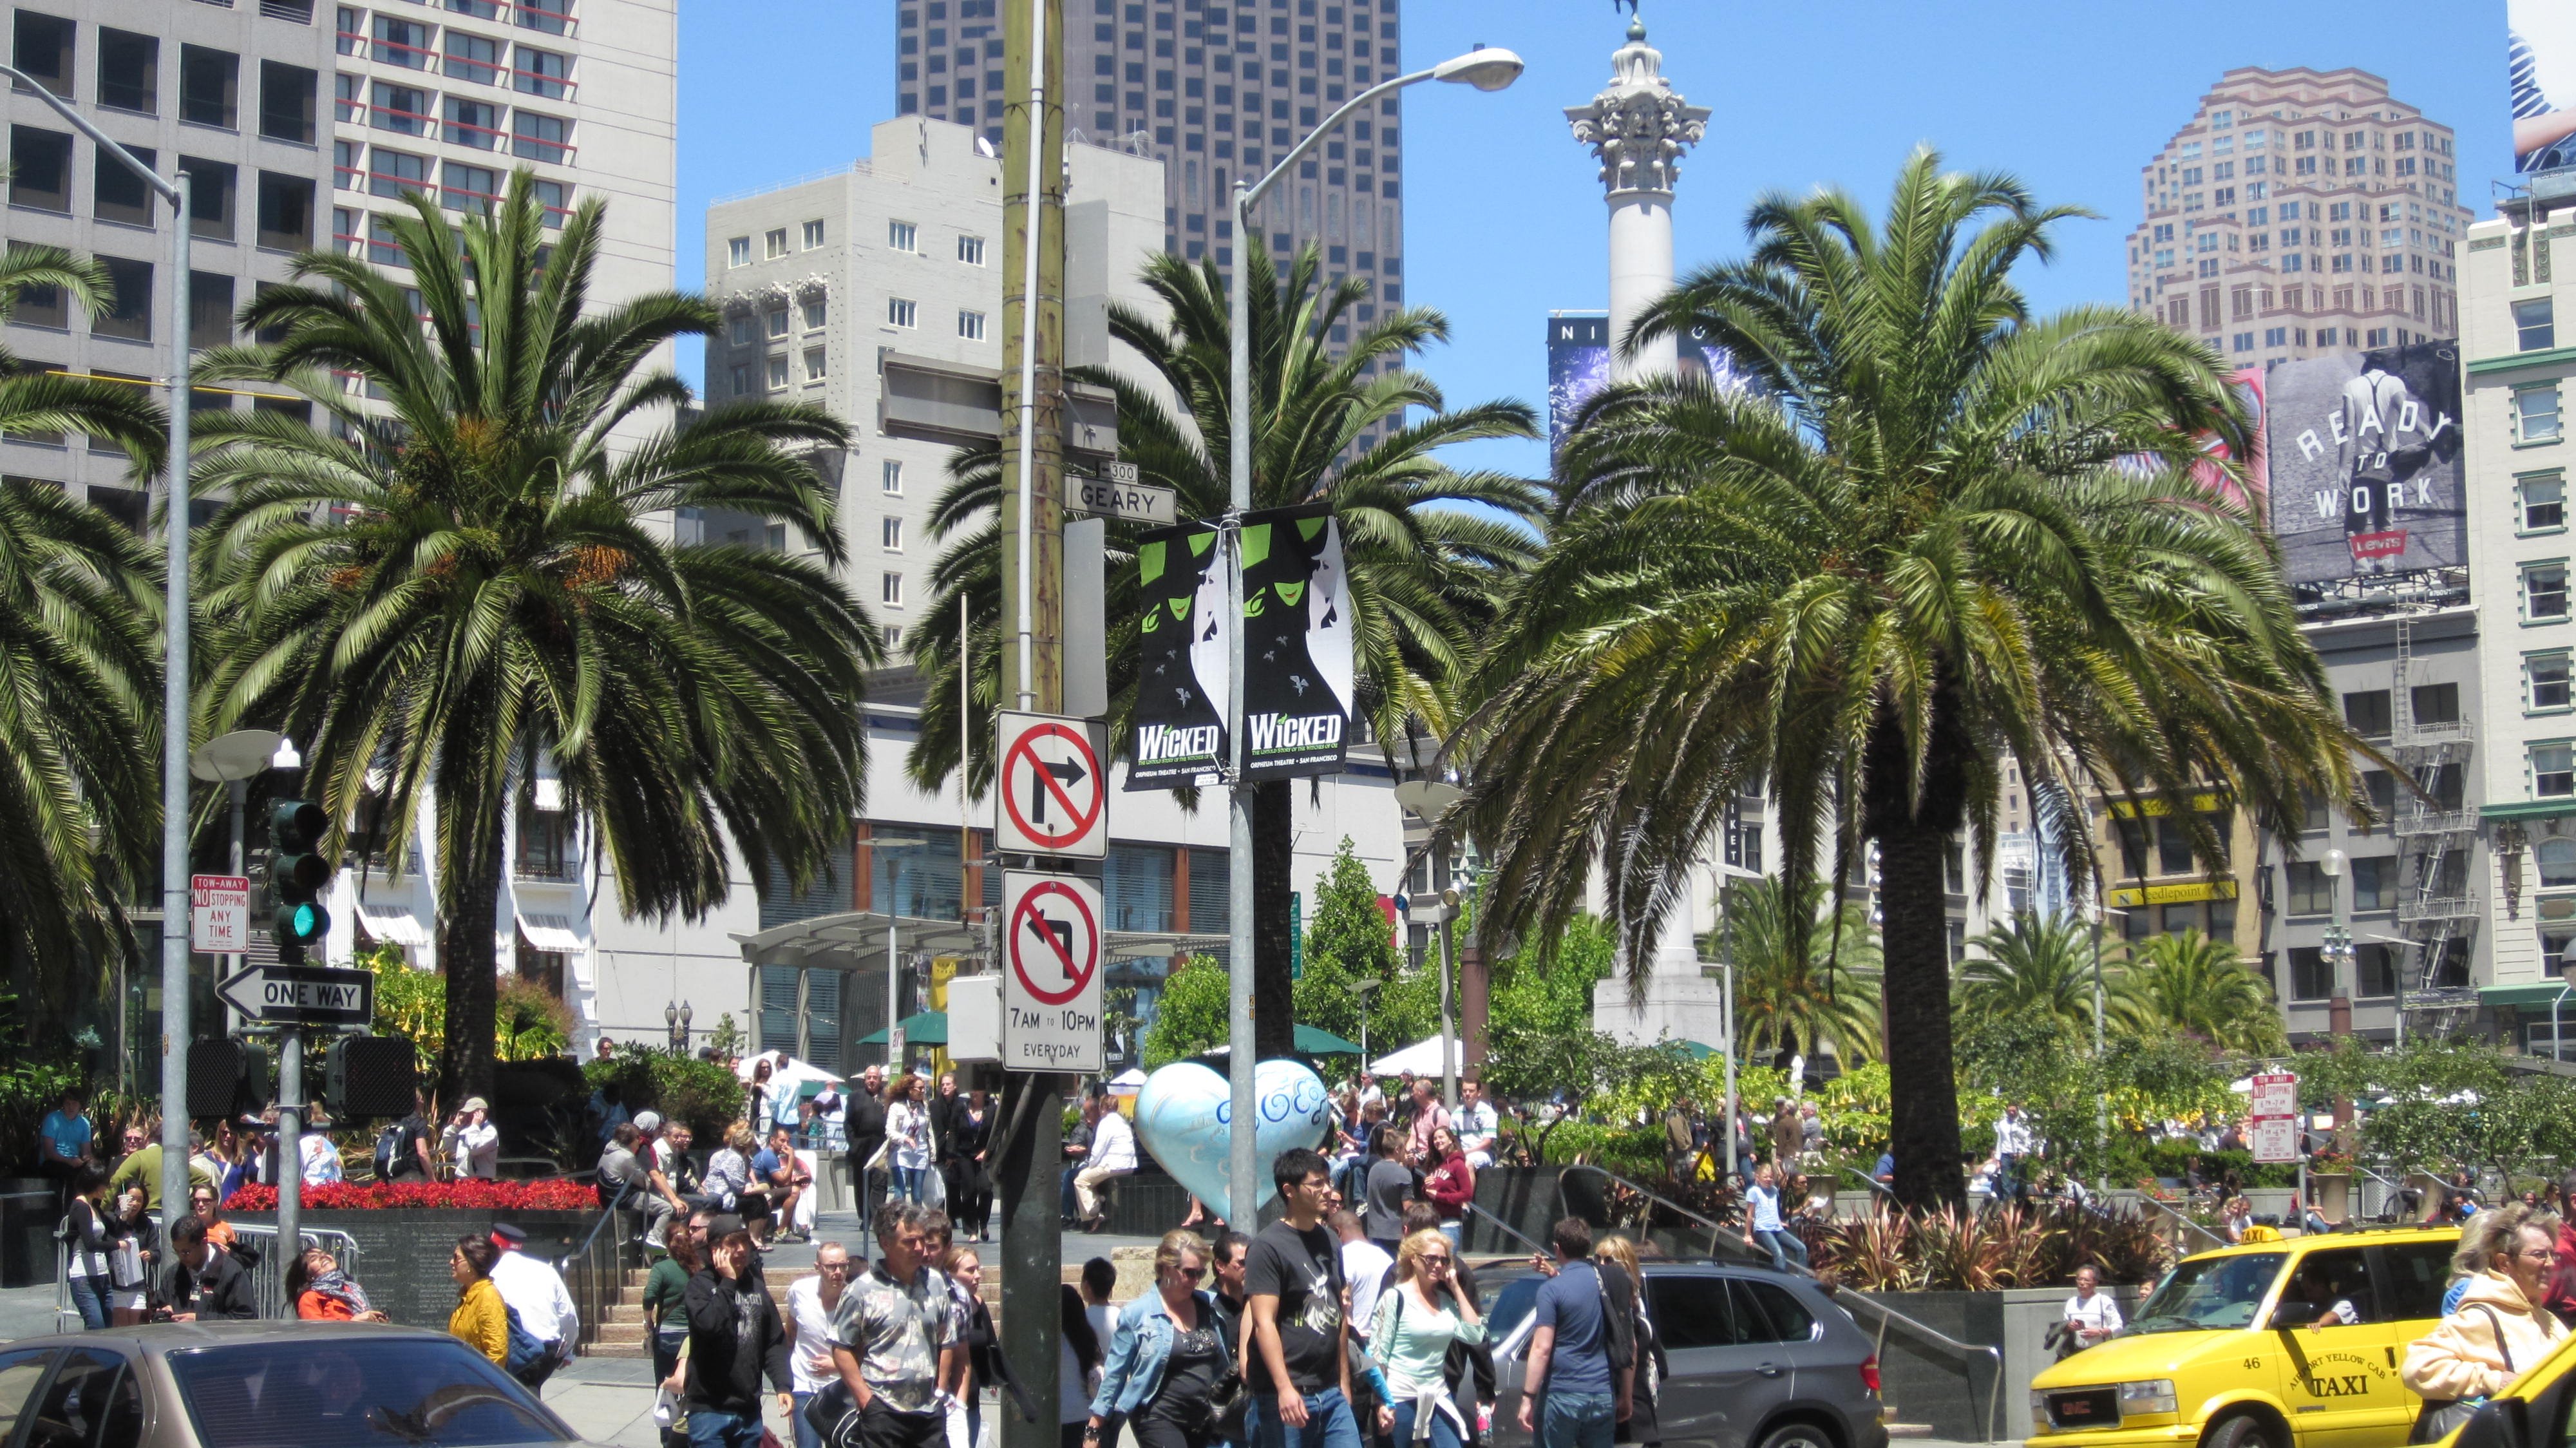 File:Union Square, SF from across the street  - Wikimedia Commons